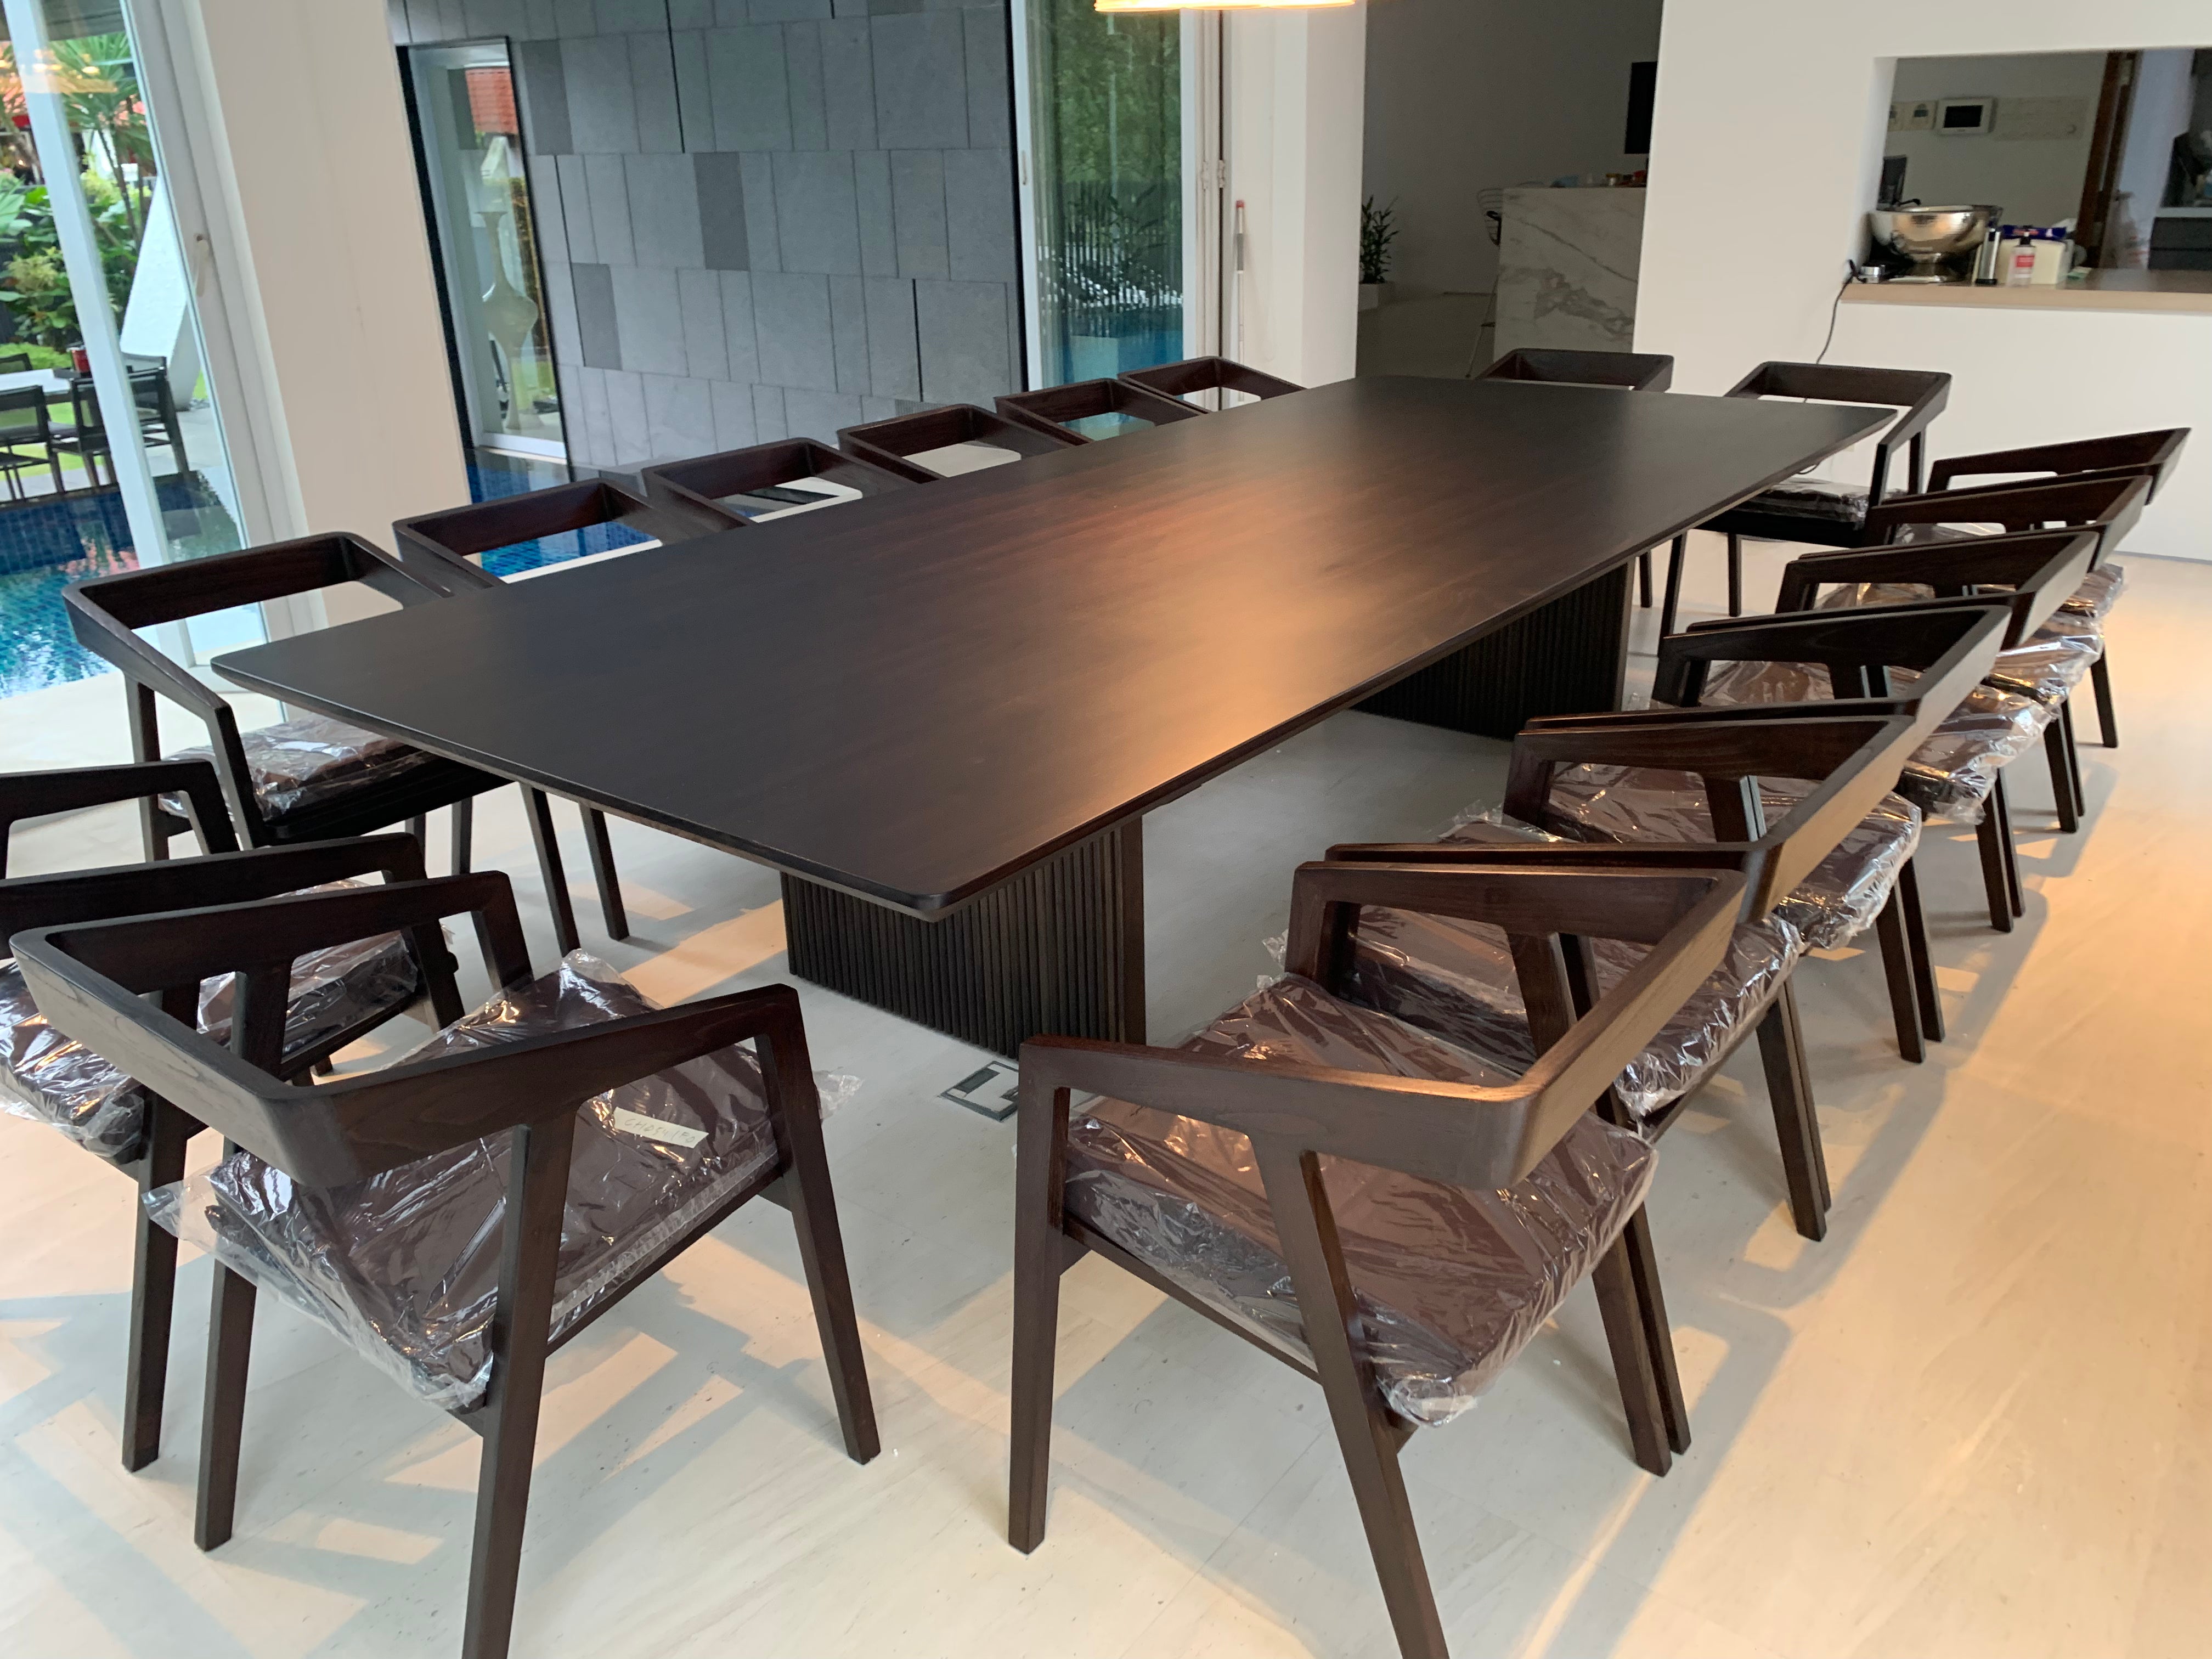 SAYLOR NEW YORK REGIS Minimalist Dining Table / Conference Table